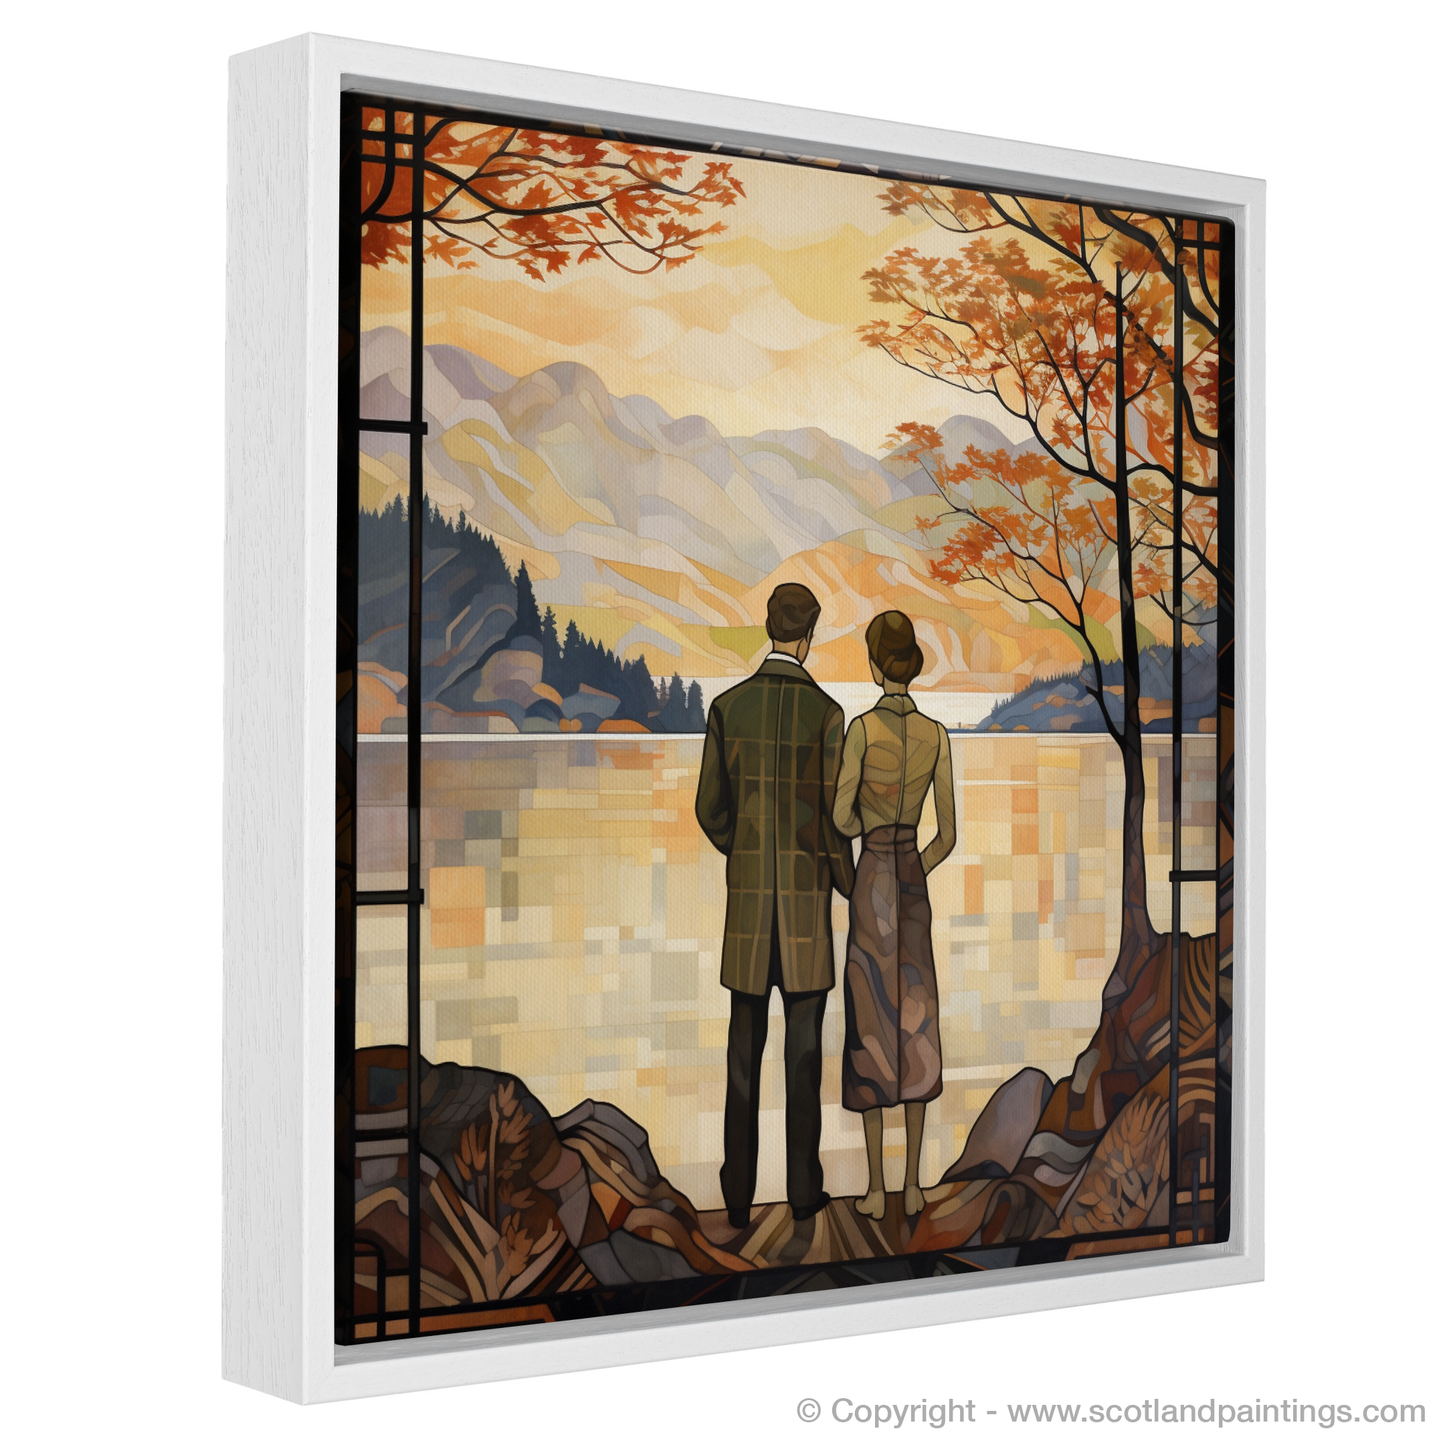 Painting and Art Print of A couple holding hands looking out on Loch Lomond entitled "Autumn Embrace at Loch Lomond - An Art Nouveau Enchantment".